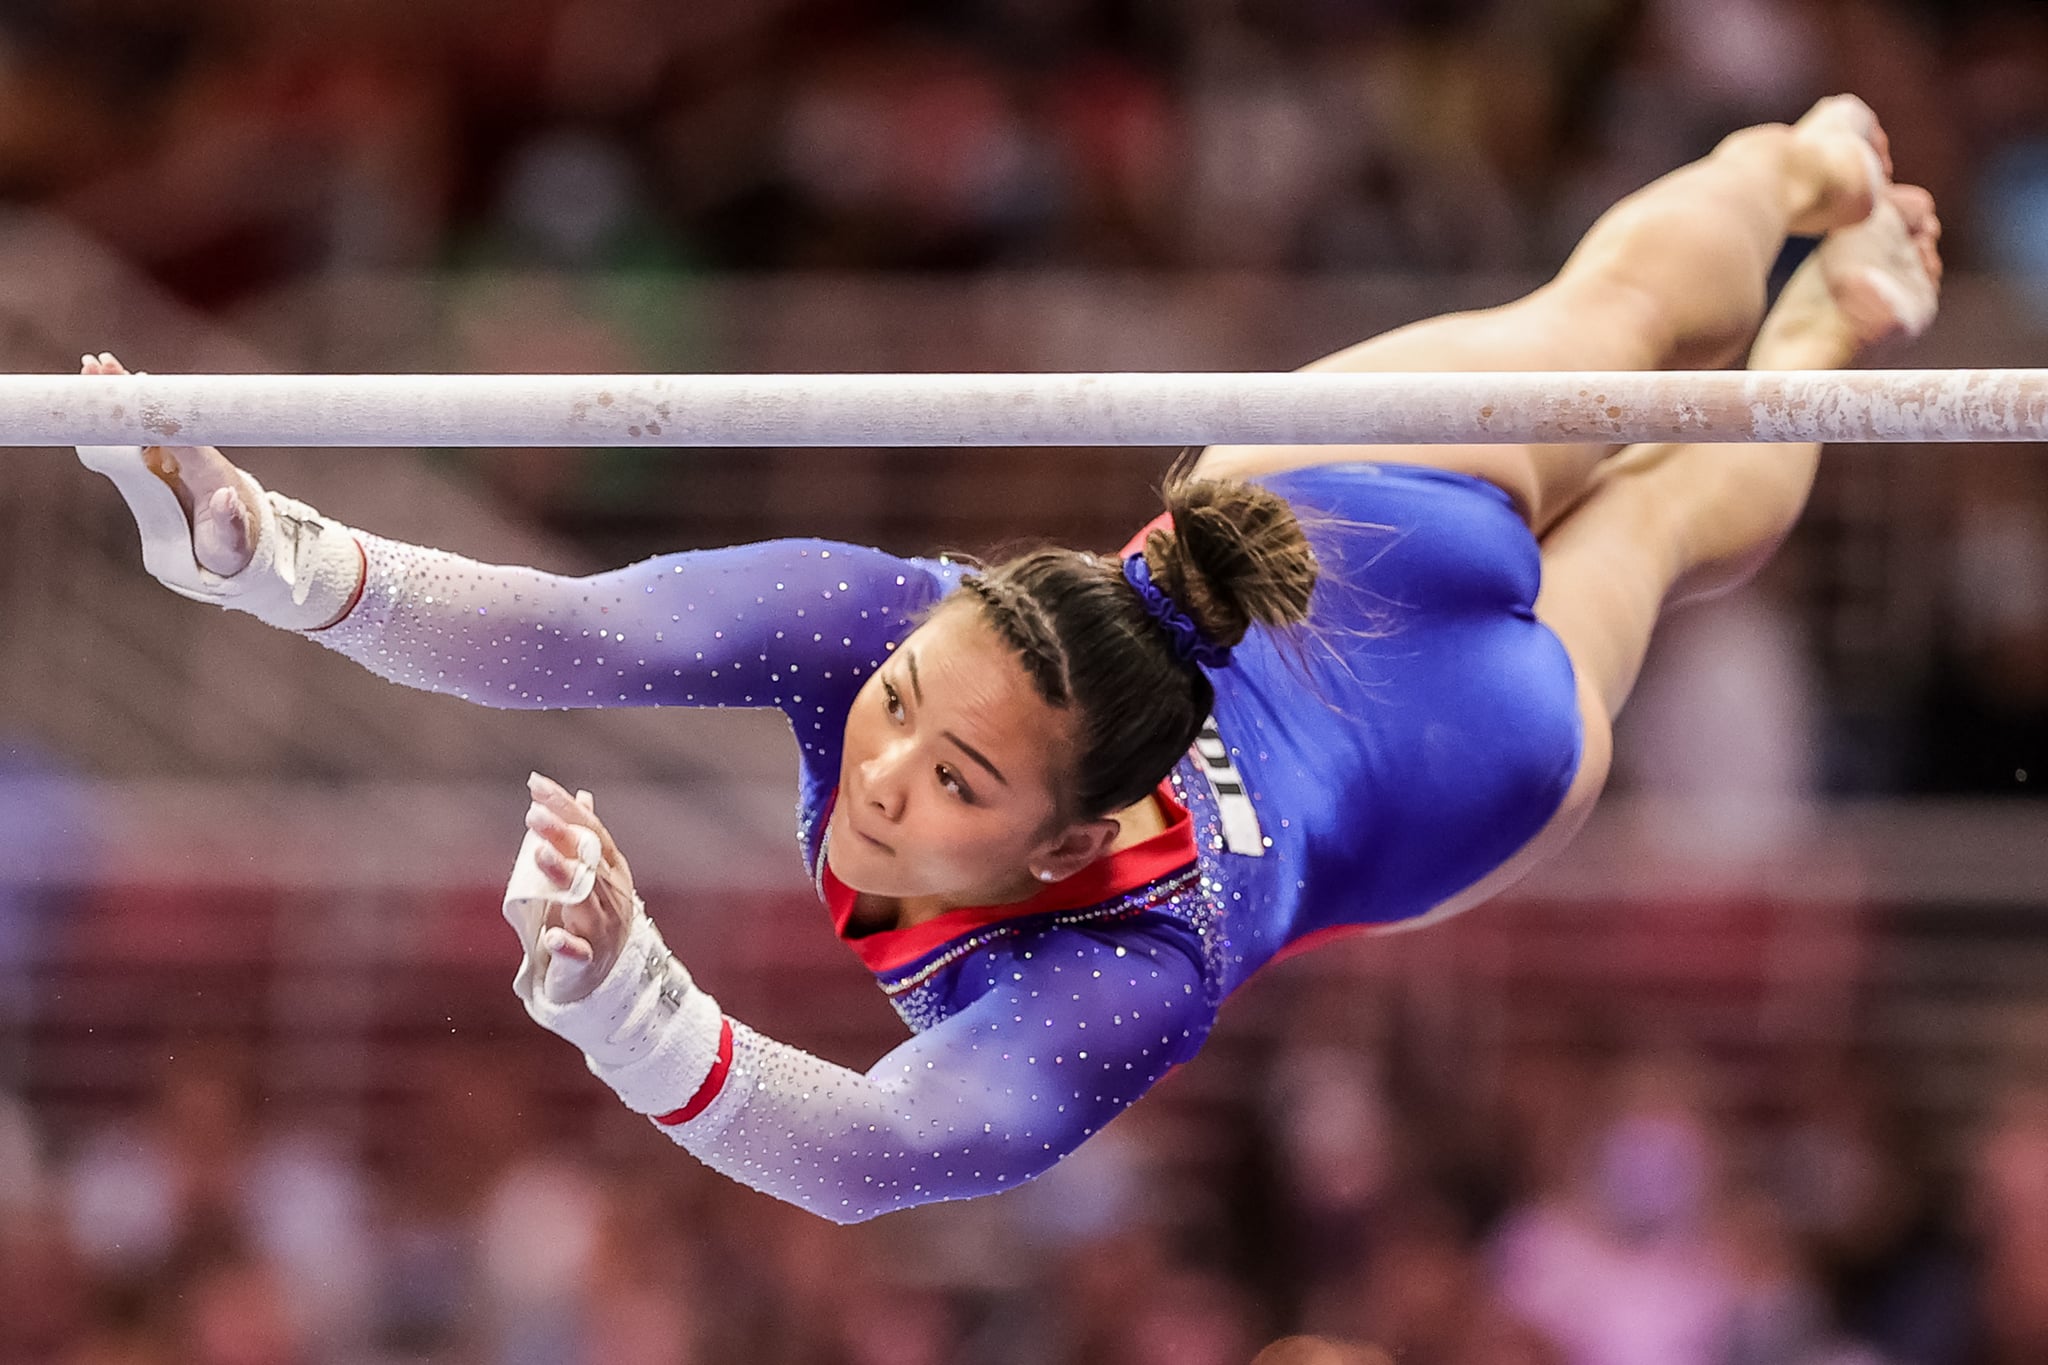 29+ 2021 Olympics Women's Gymnastics Team Gif All in Here